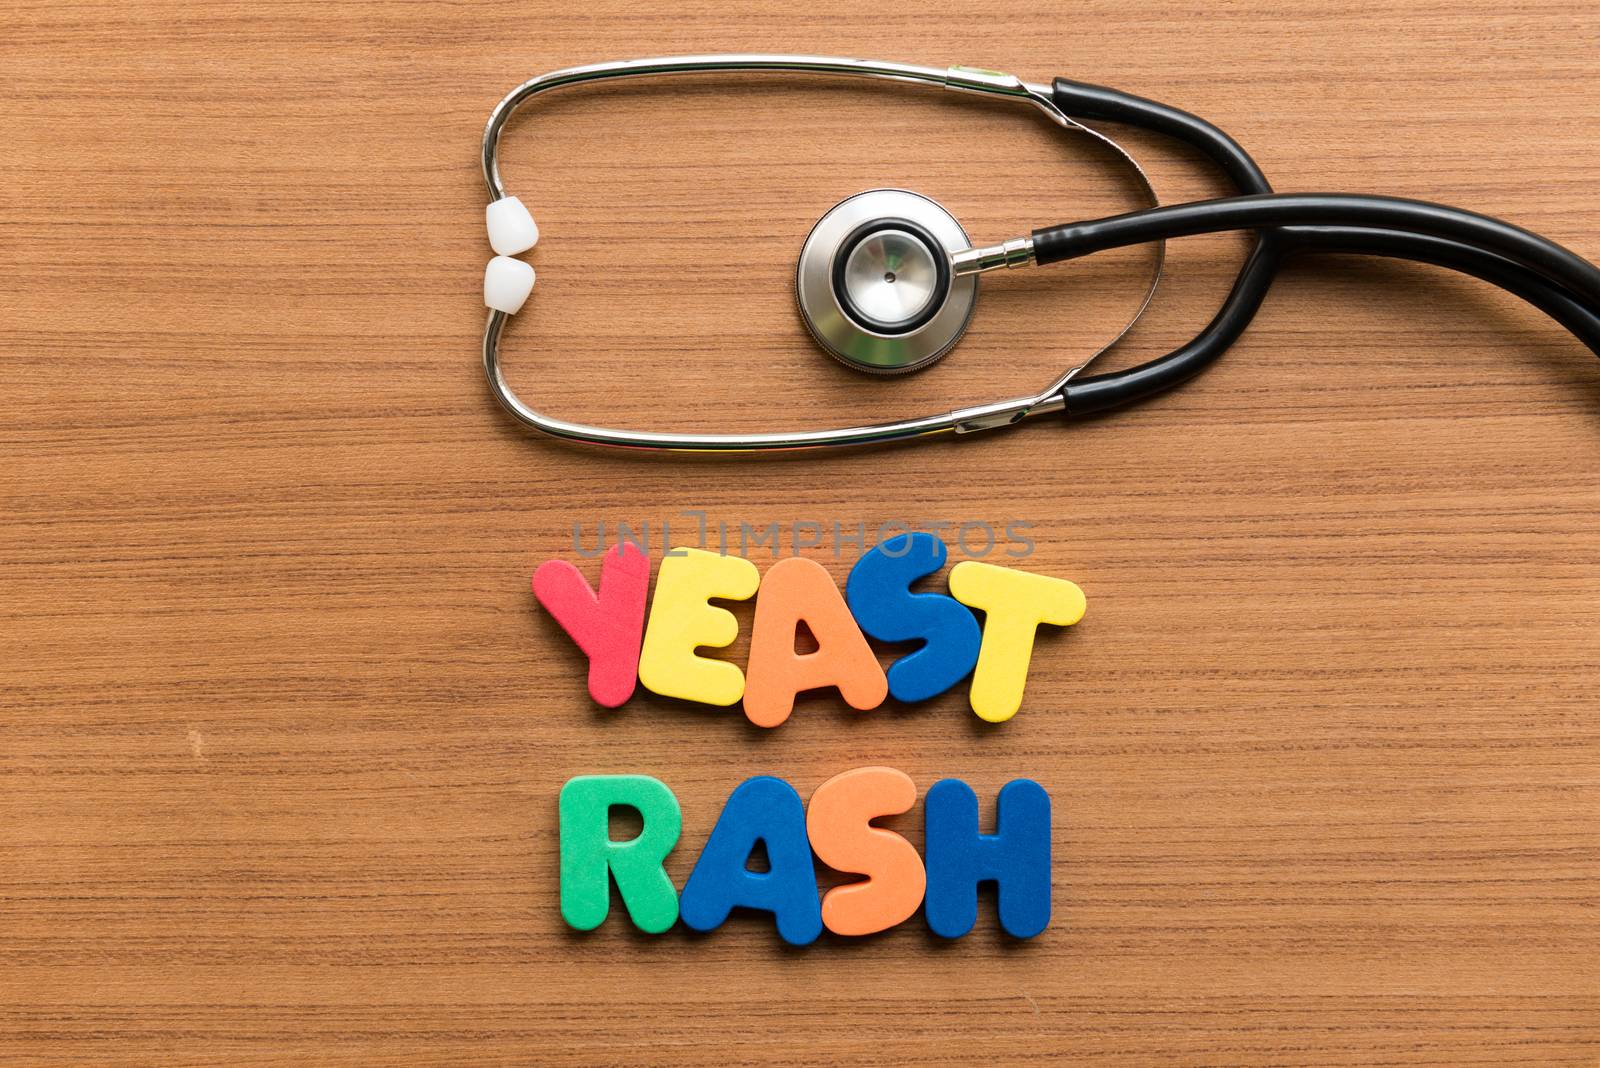 yeast rash colorful word with stethoscope on wooden background